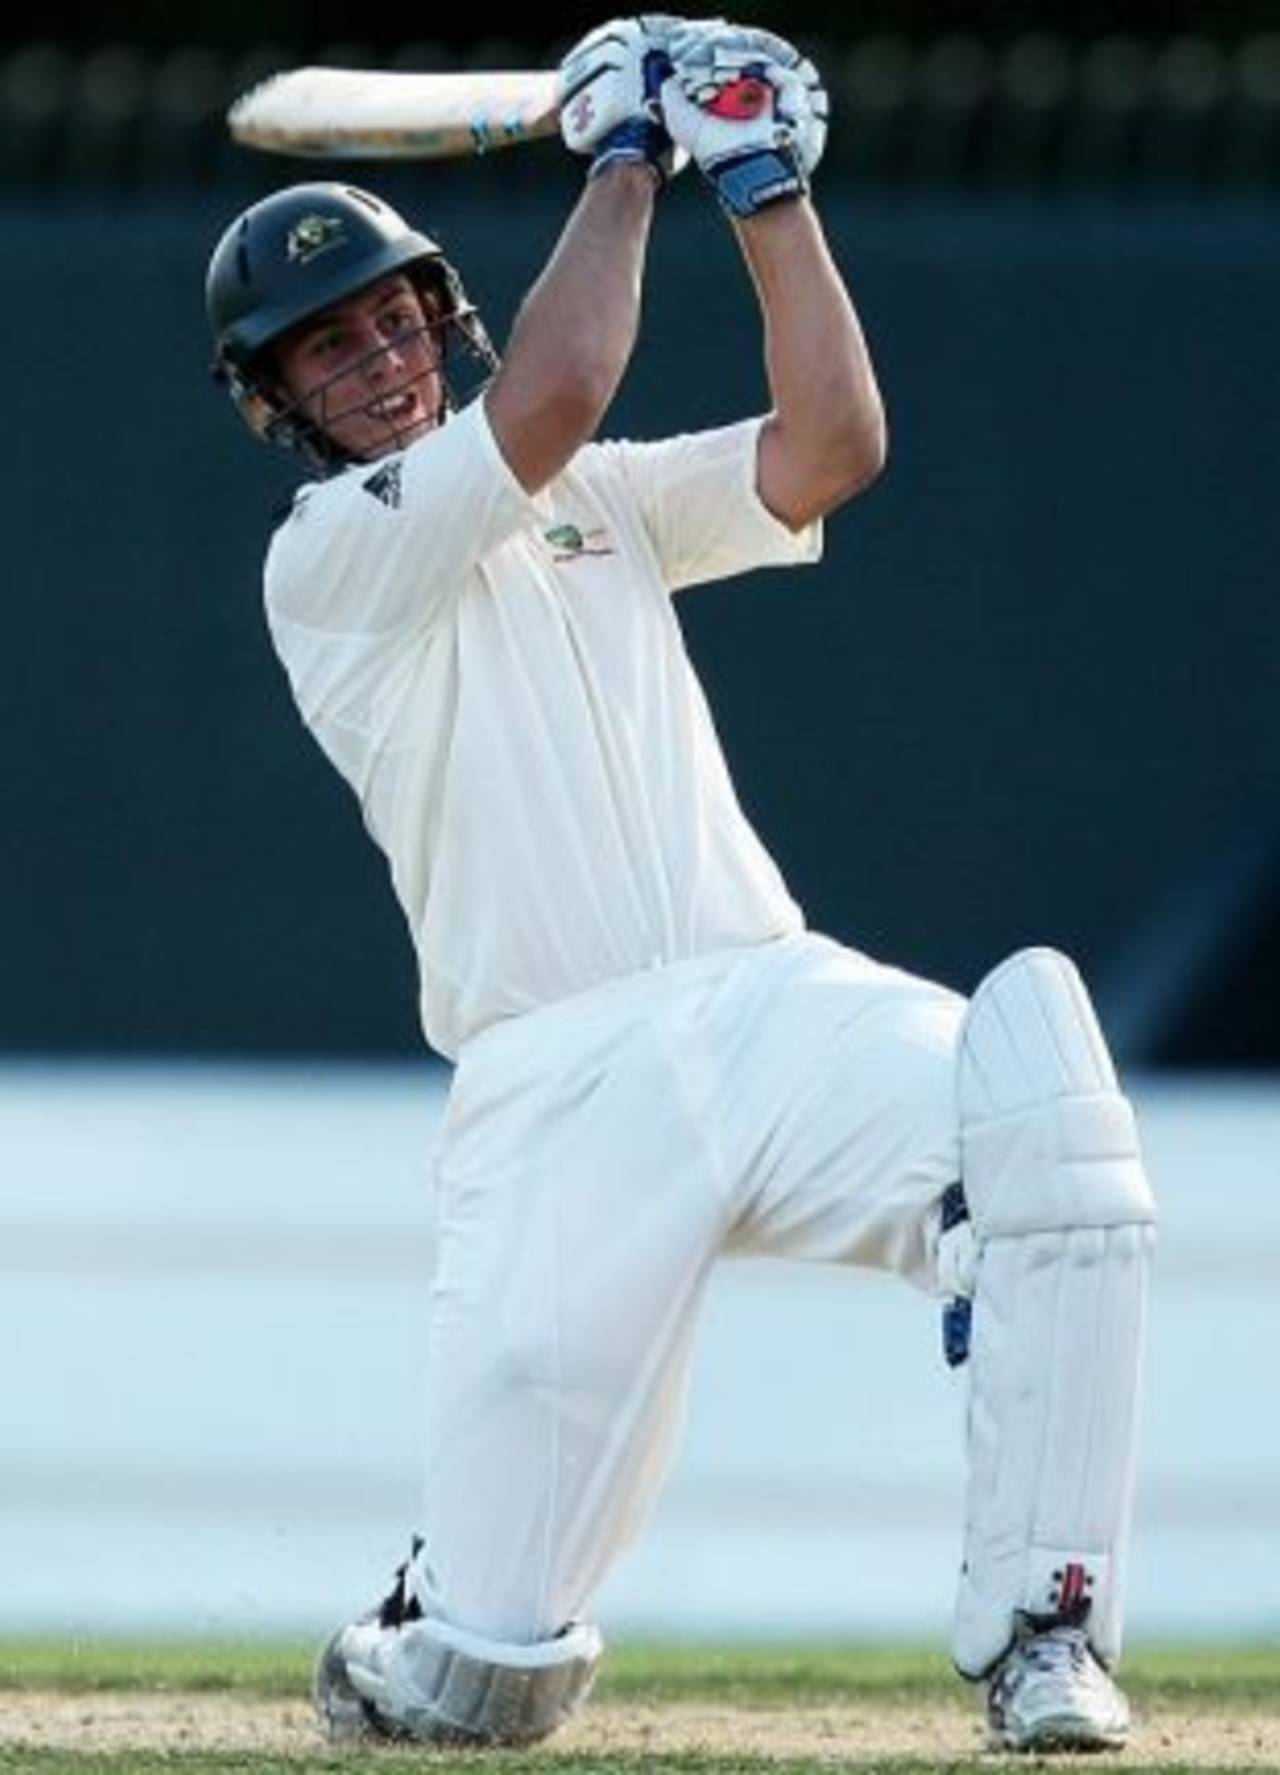 Mitchell Marsh, who played for the Australian Institute of Sports in the Emerging Players tournament, is part of the Under-19 squad&nbsp;&nbsp;&bull;&nbsp;&nbsp;Getty Images